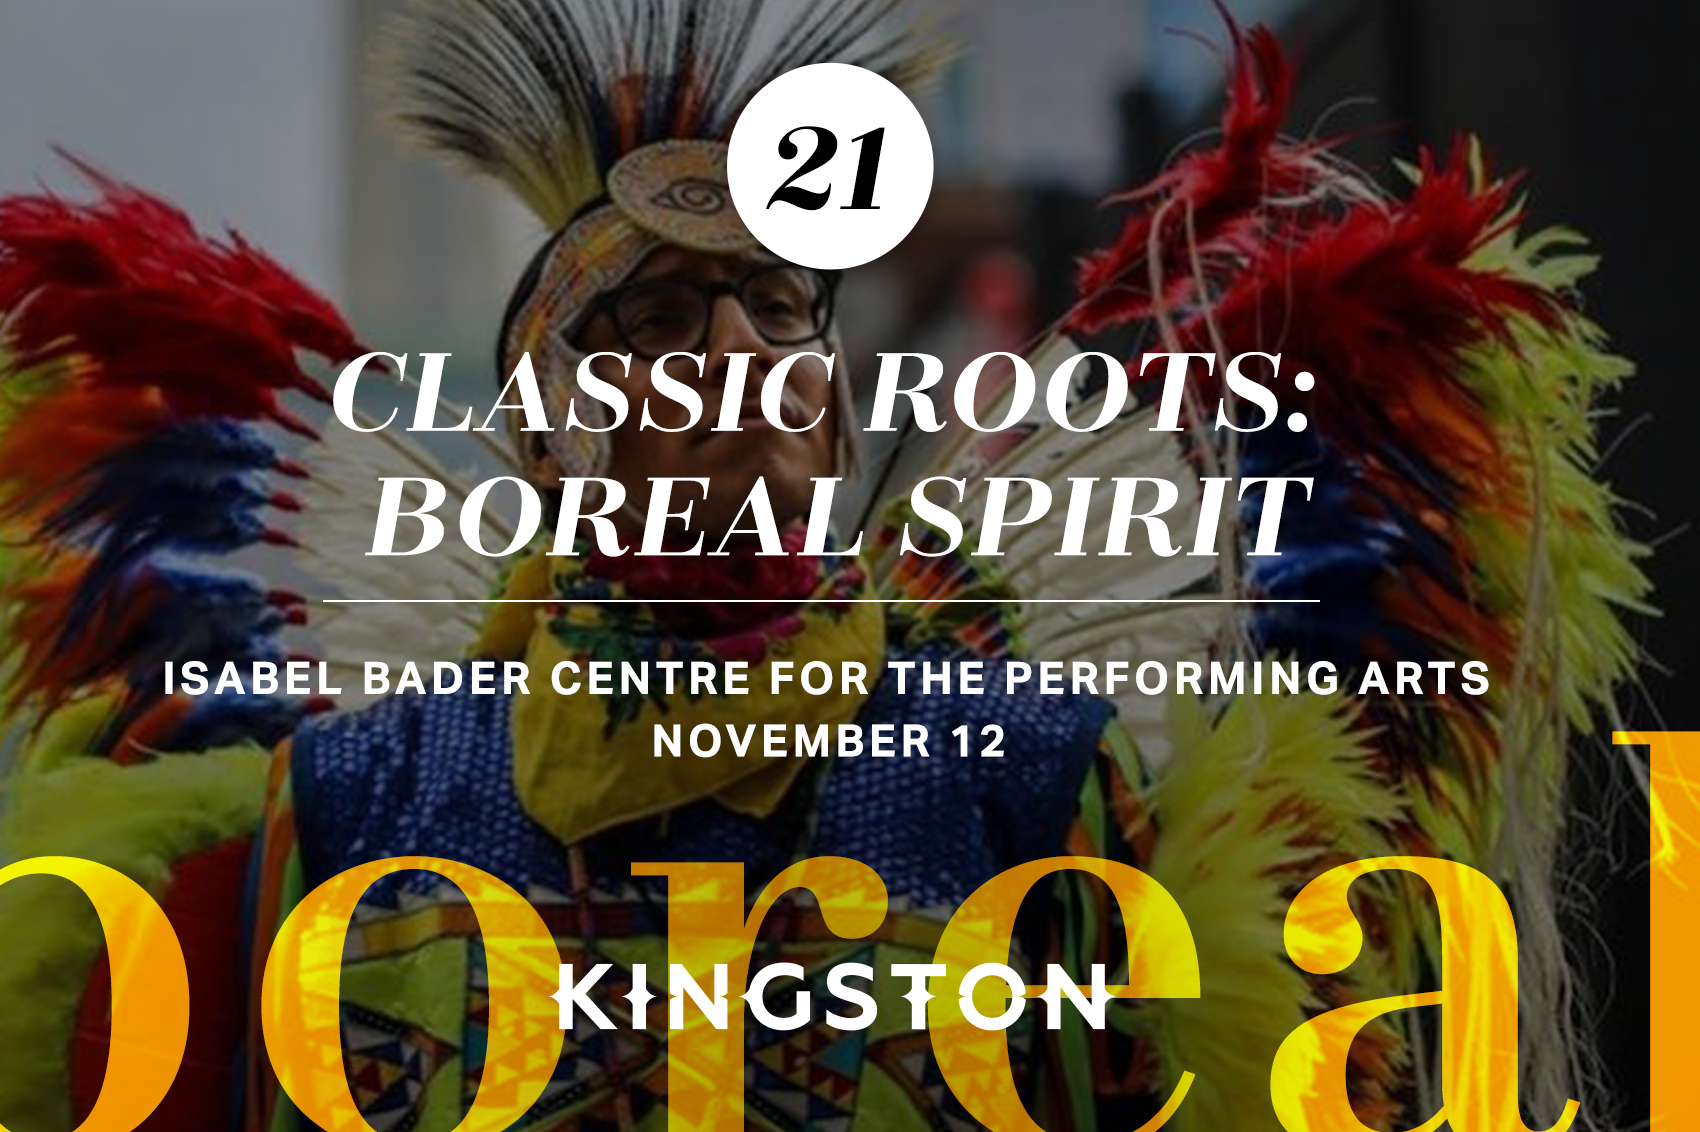 21. Classic Roots: Boreal Spirit: Isabel Bader Centre for the performing arts November 12